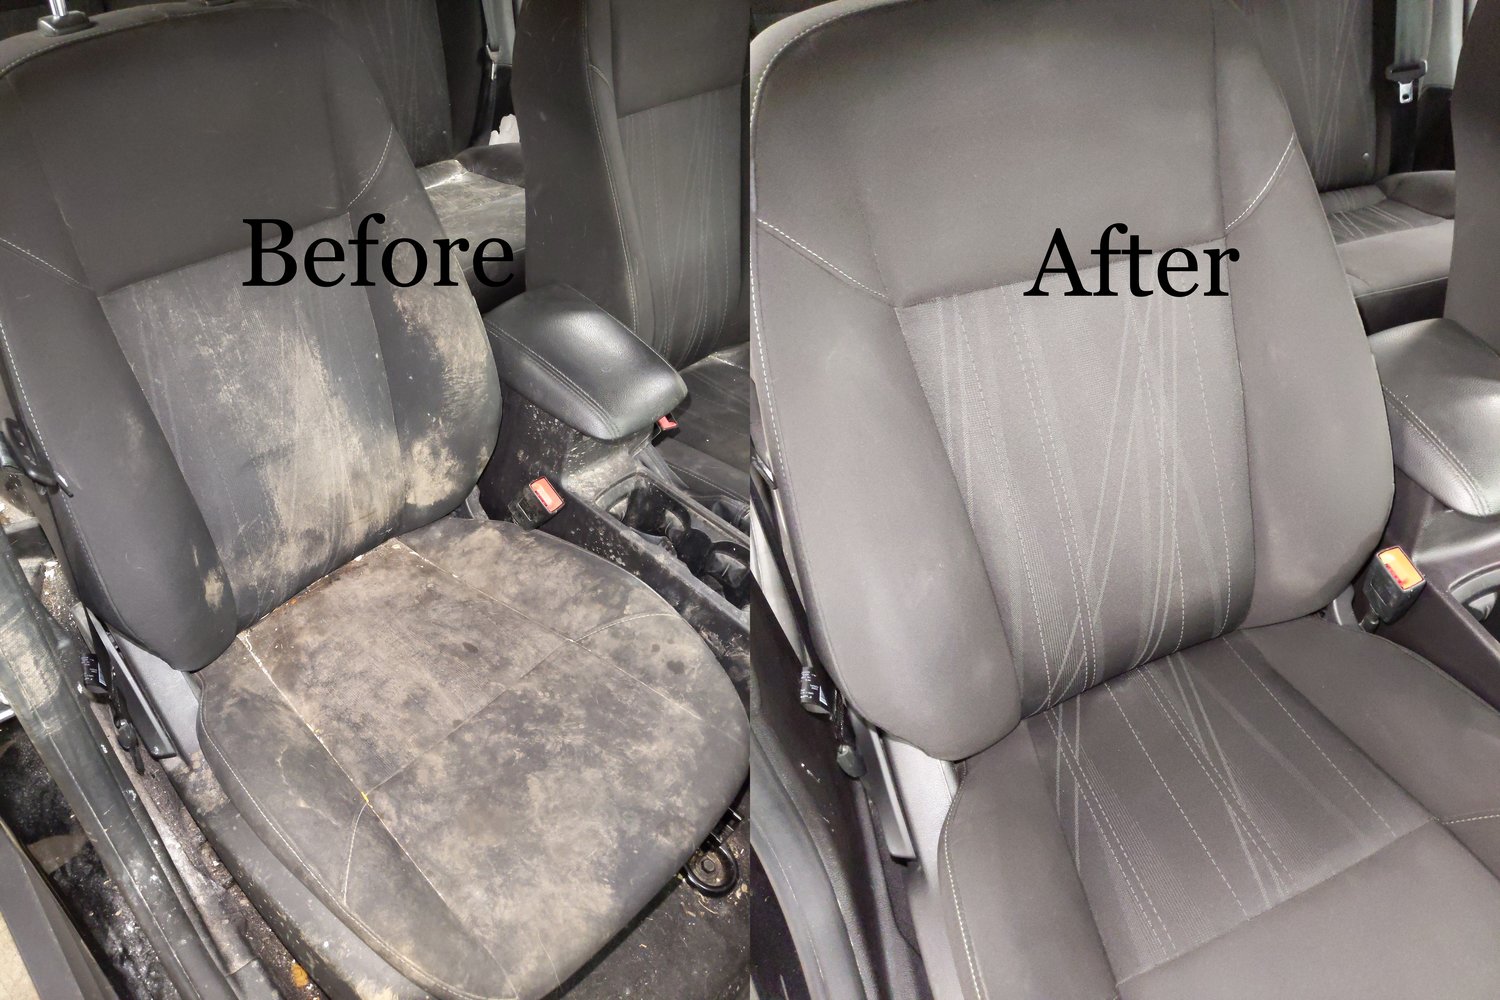 Clean Car Upholstery Remove Stains, How To Get Stains Out Of Leather Seats